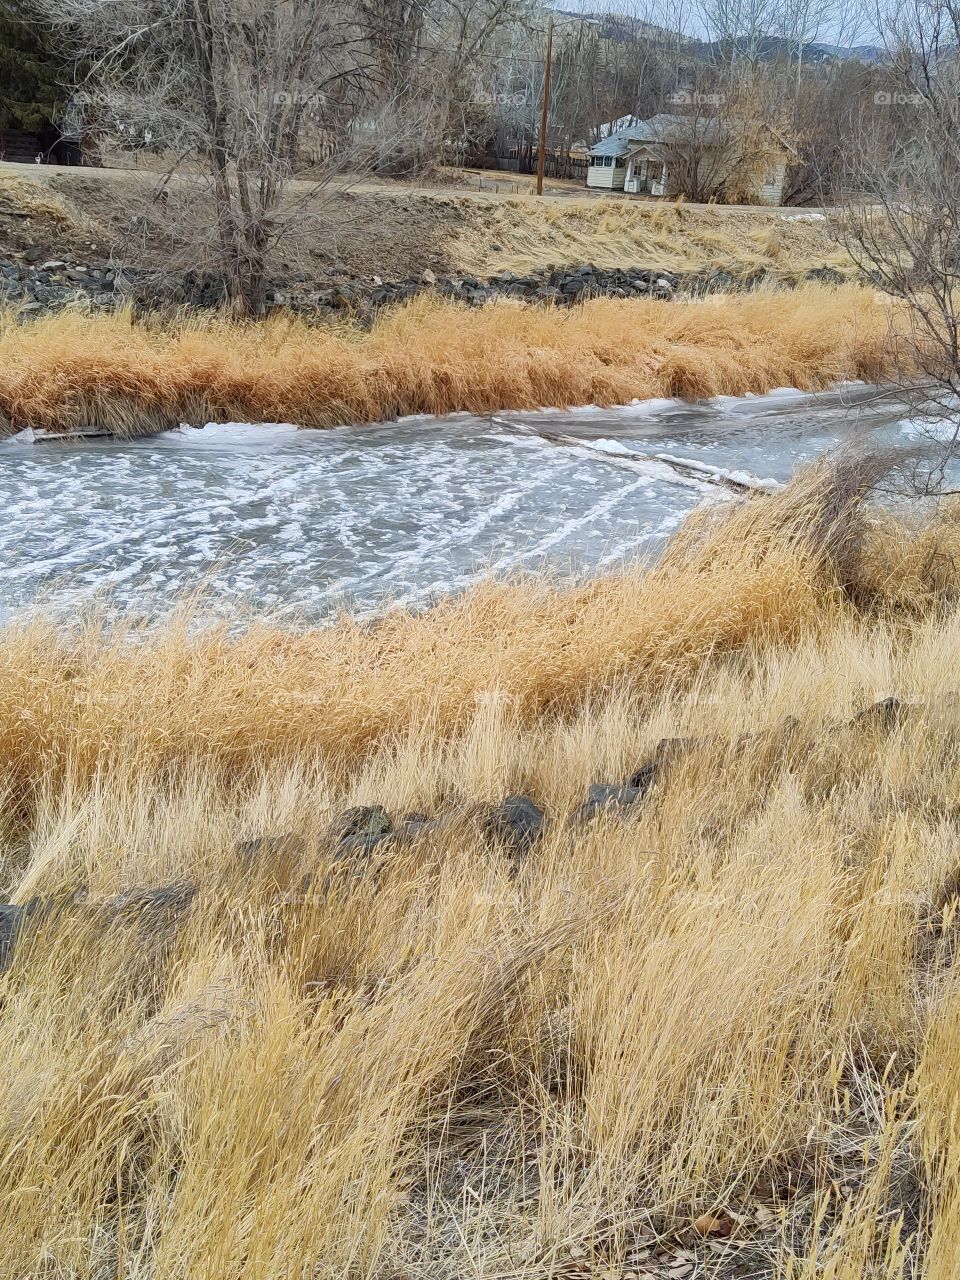 Frozen river. You can see the waves in the ice.